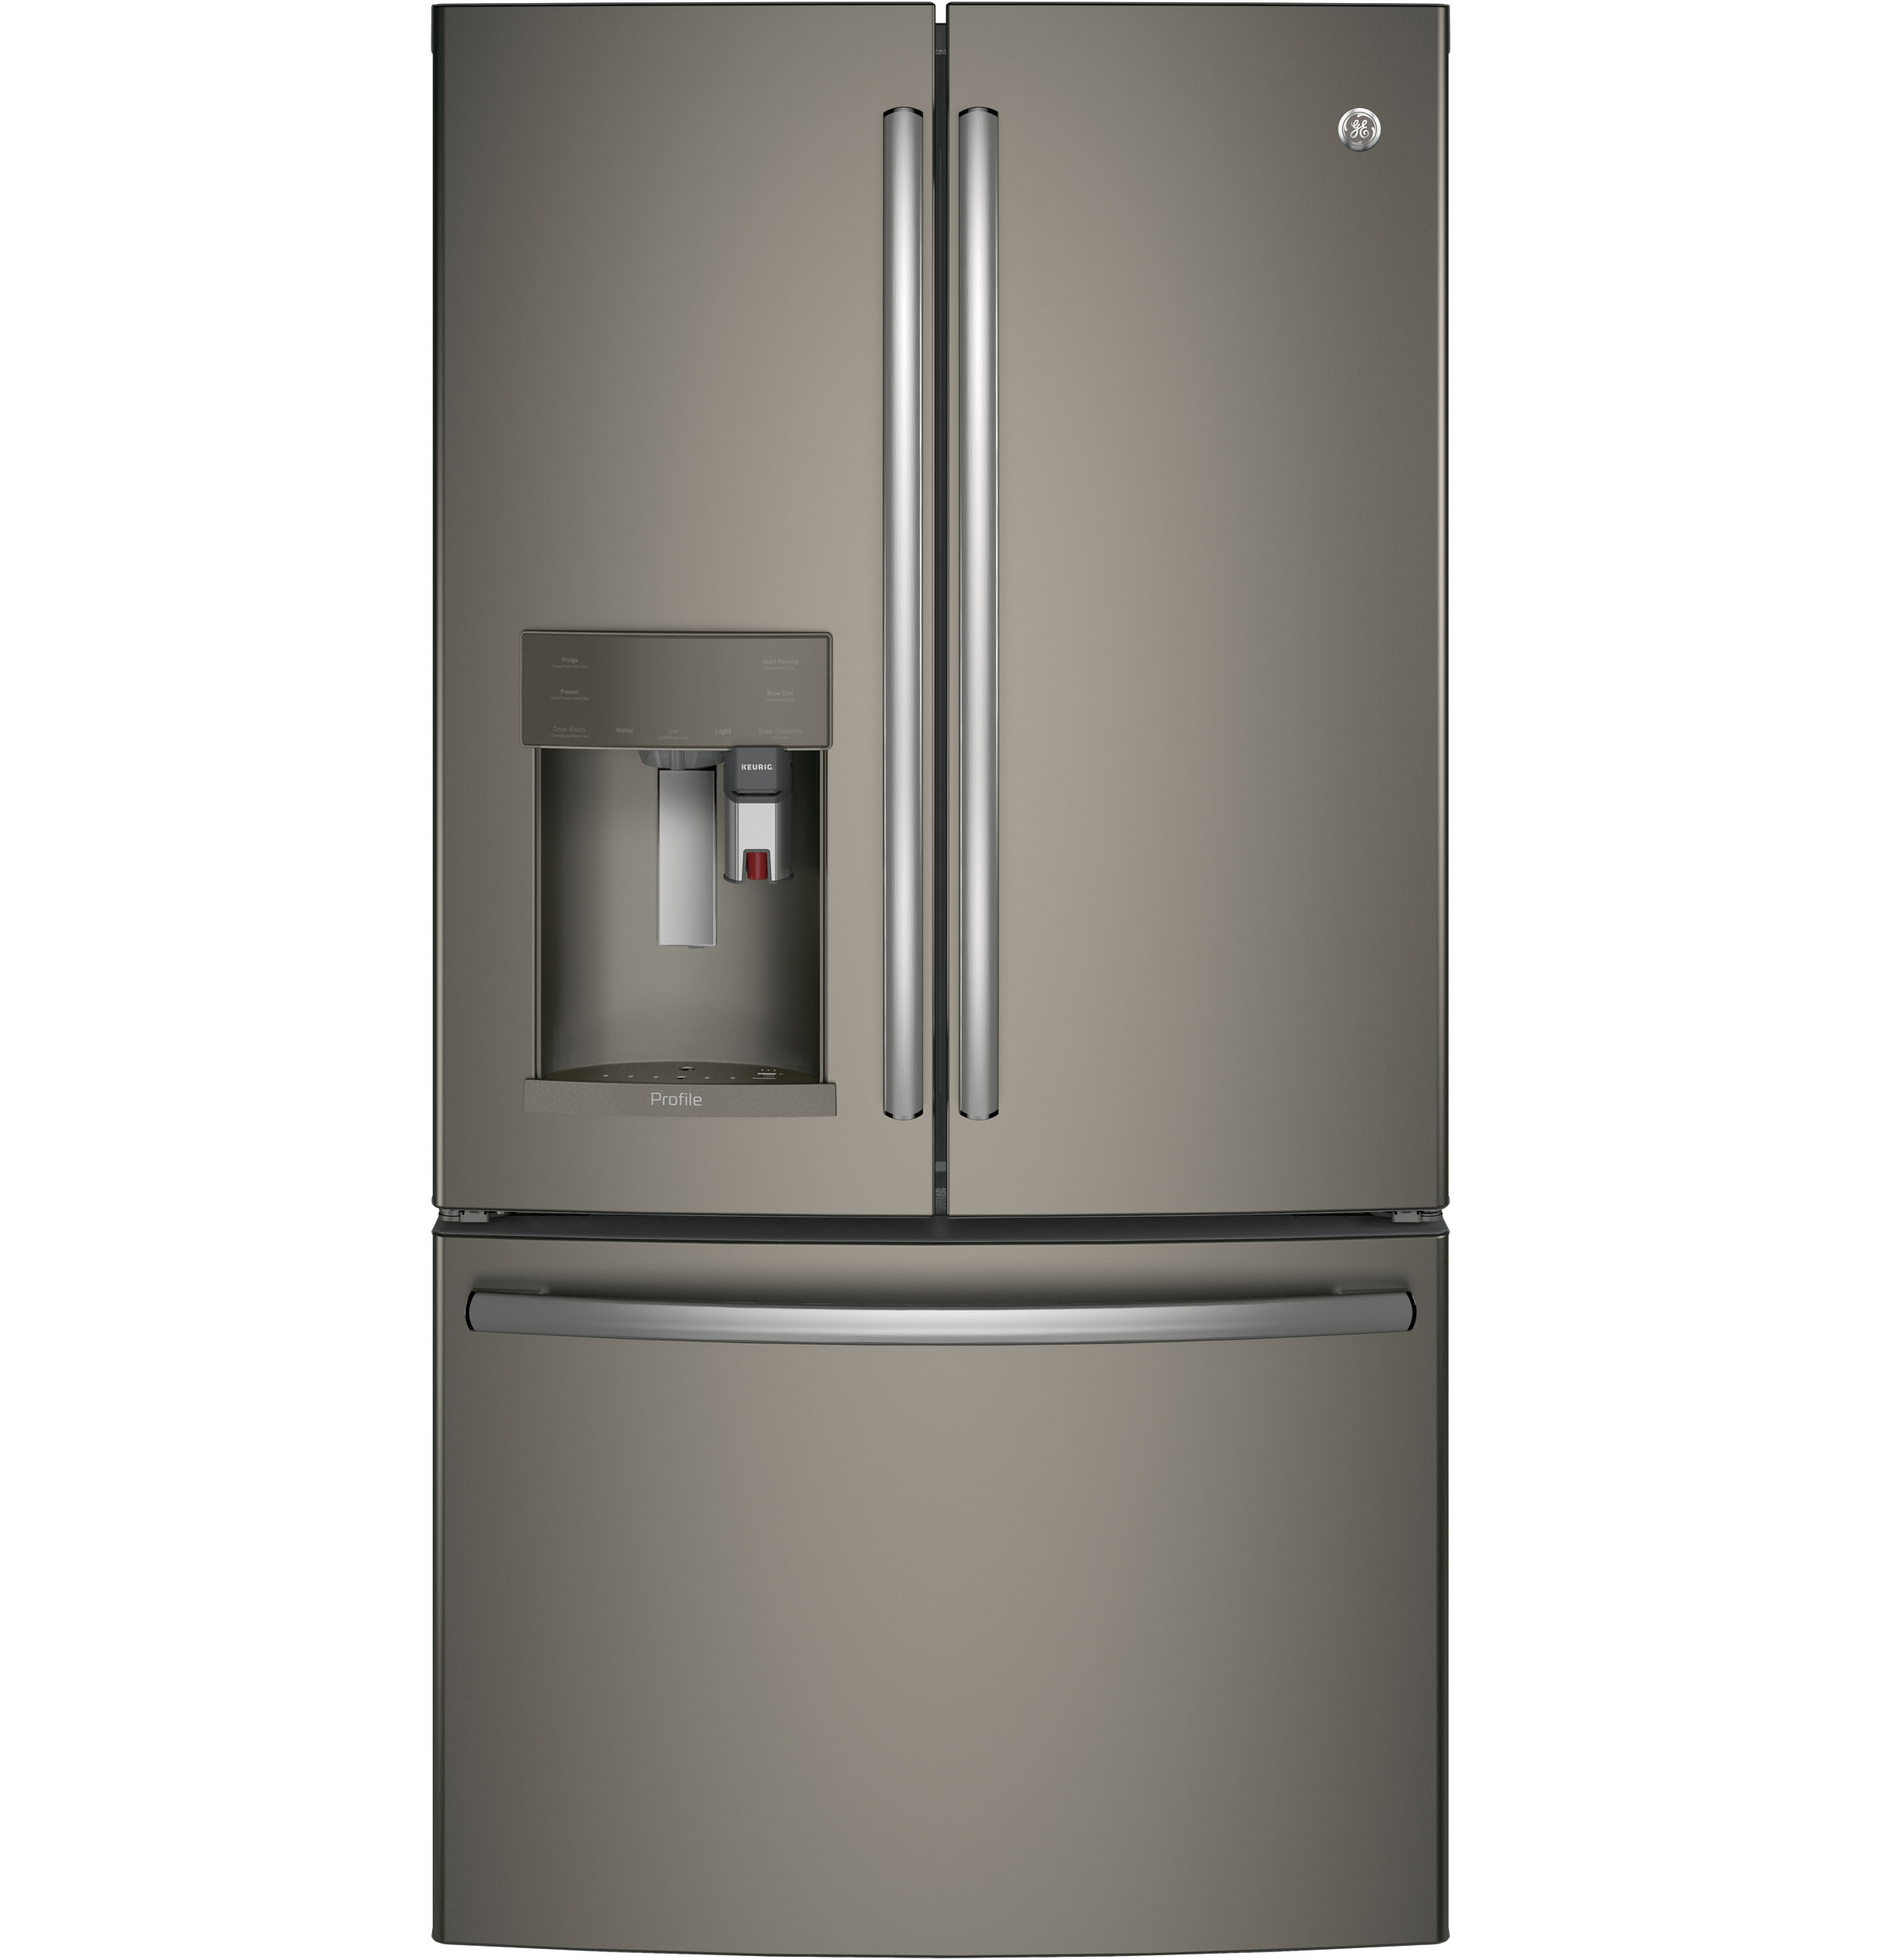 GE Profile™ Series ENERGY STAR® 27.7 Cu. Ft. French-Door Refrigerator with Keurig® K-Cup® Brewing System